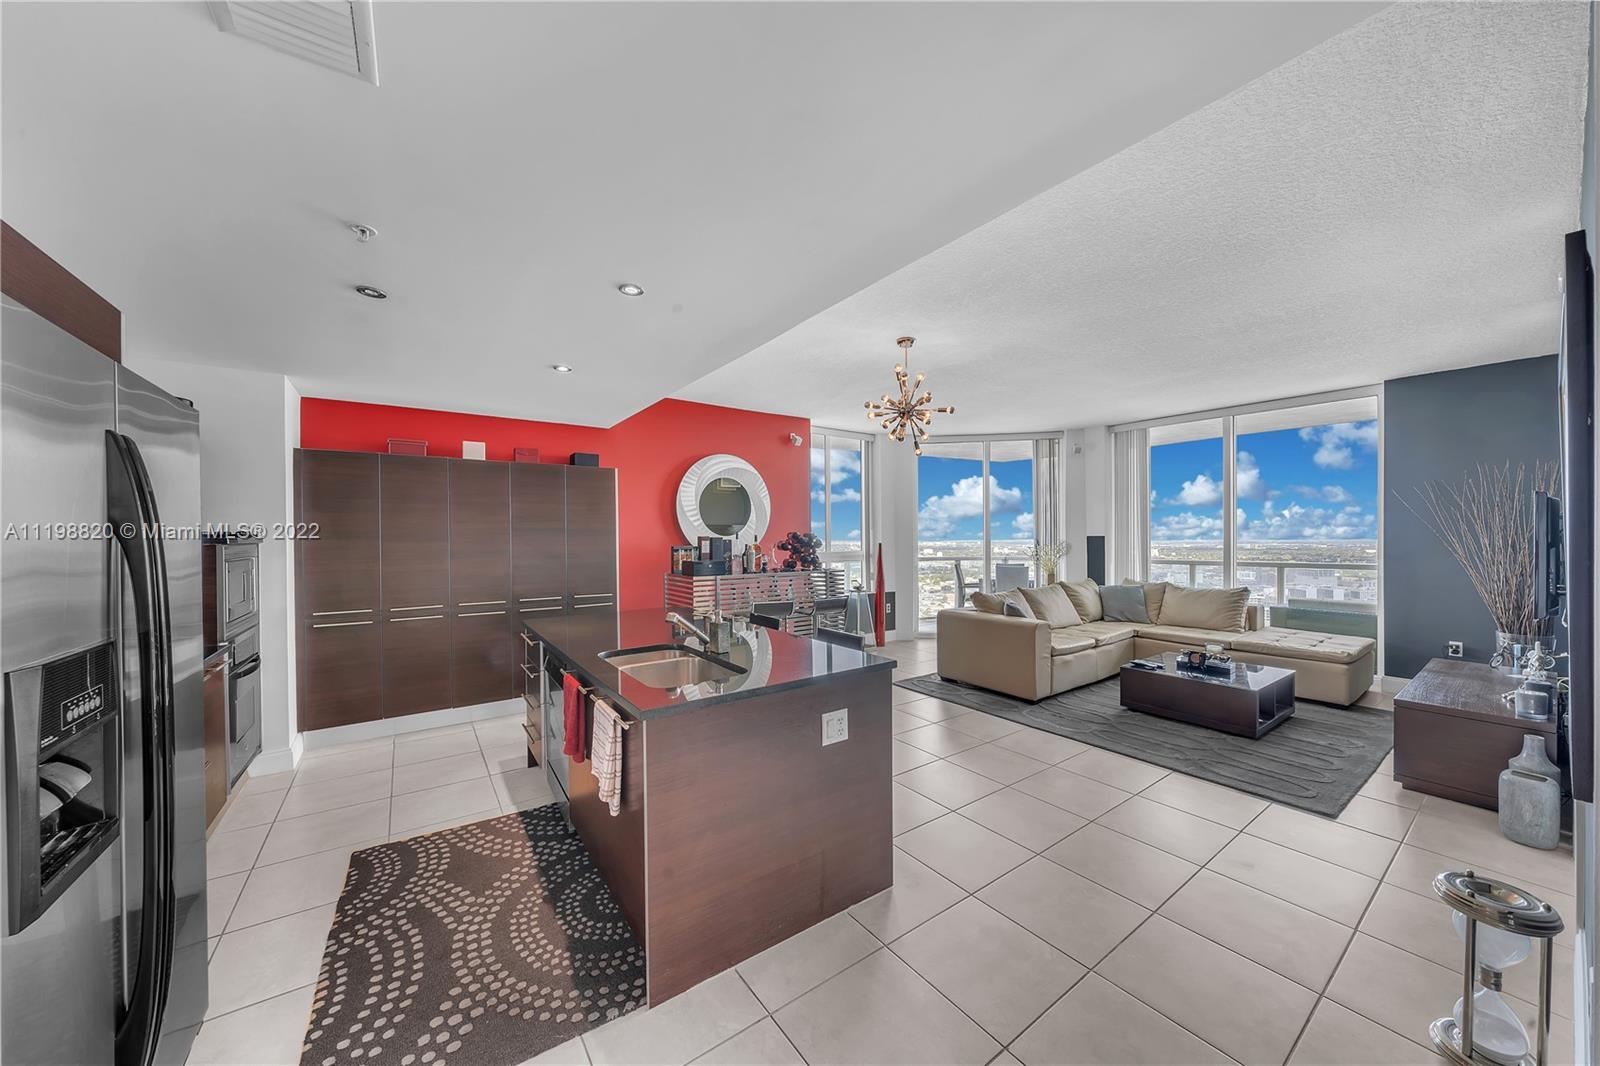 Experience unbelievable city and bay views from every inch of this magnificent luxury condo at Quant